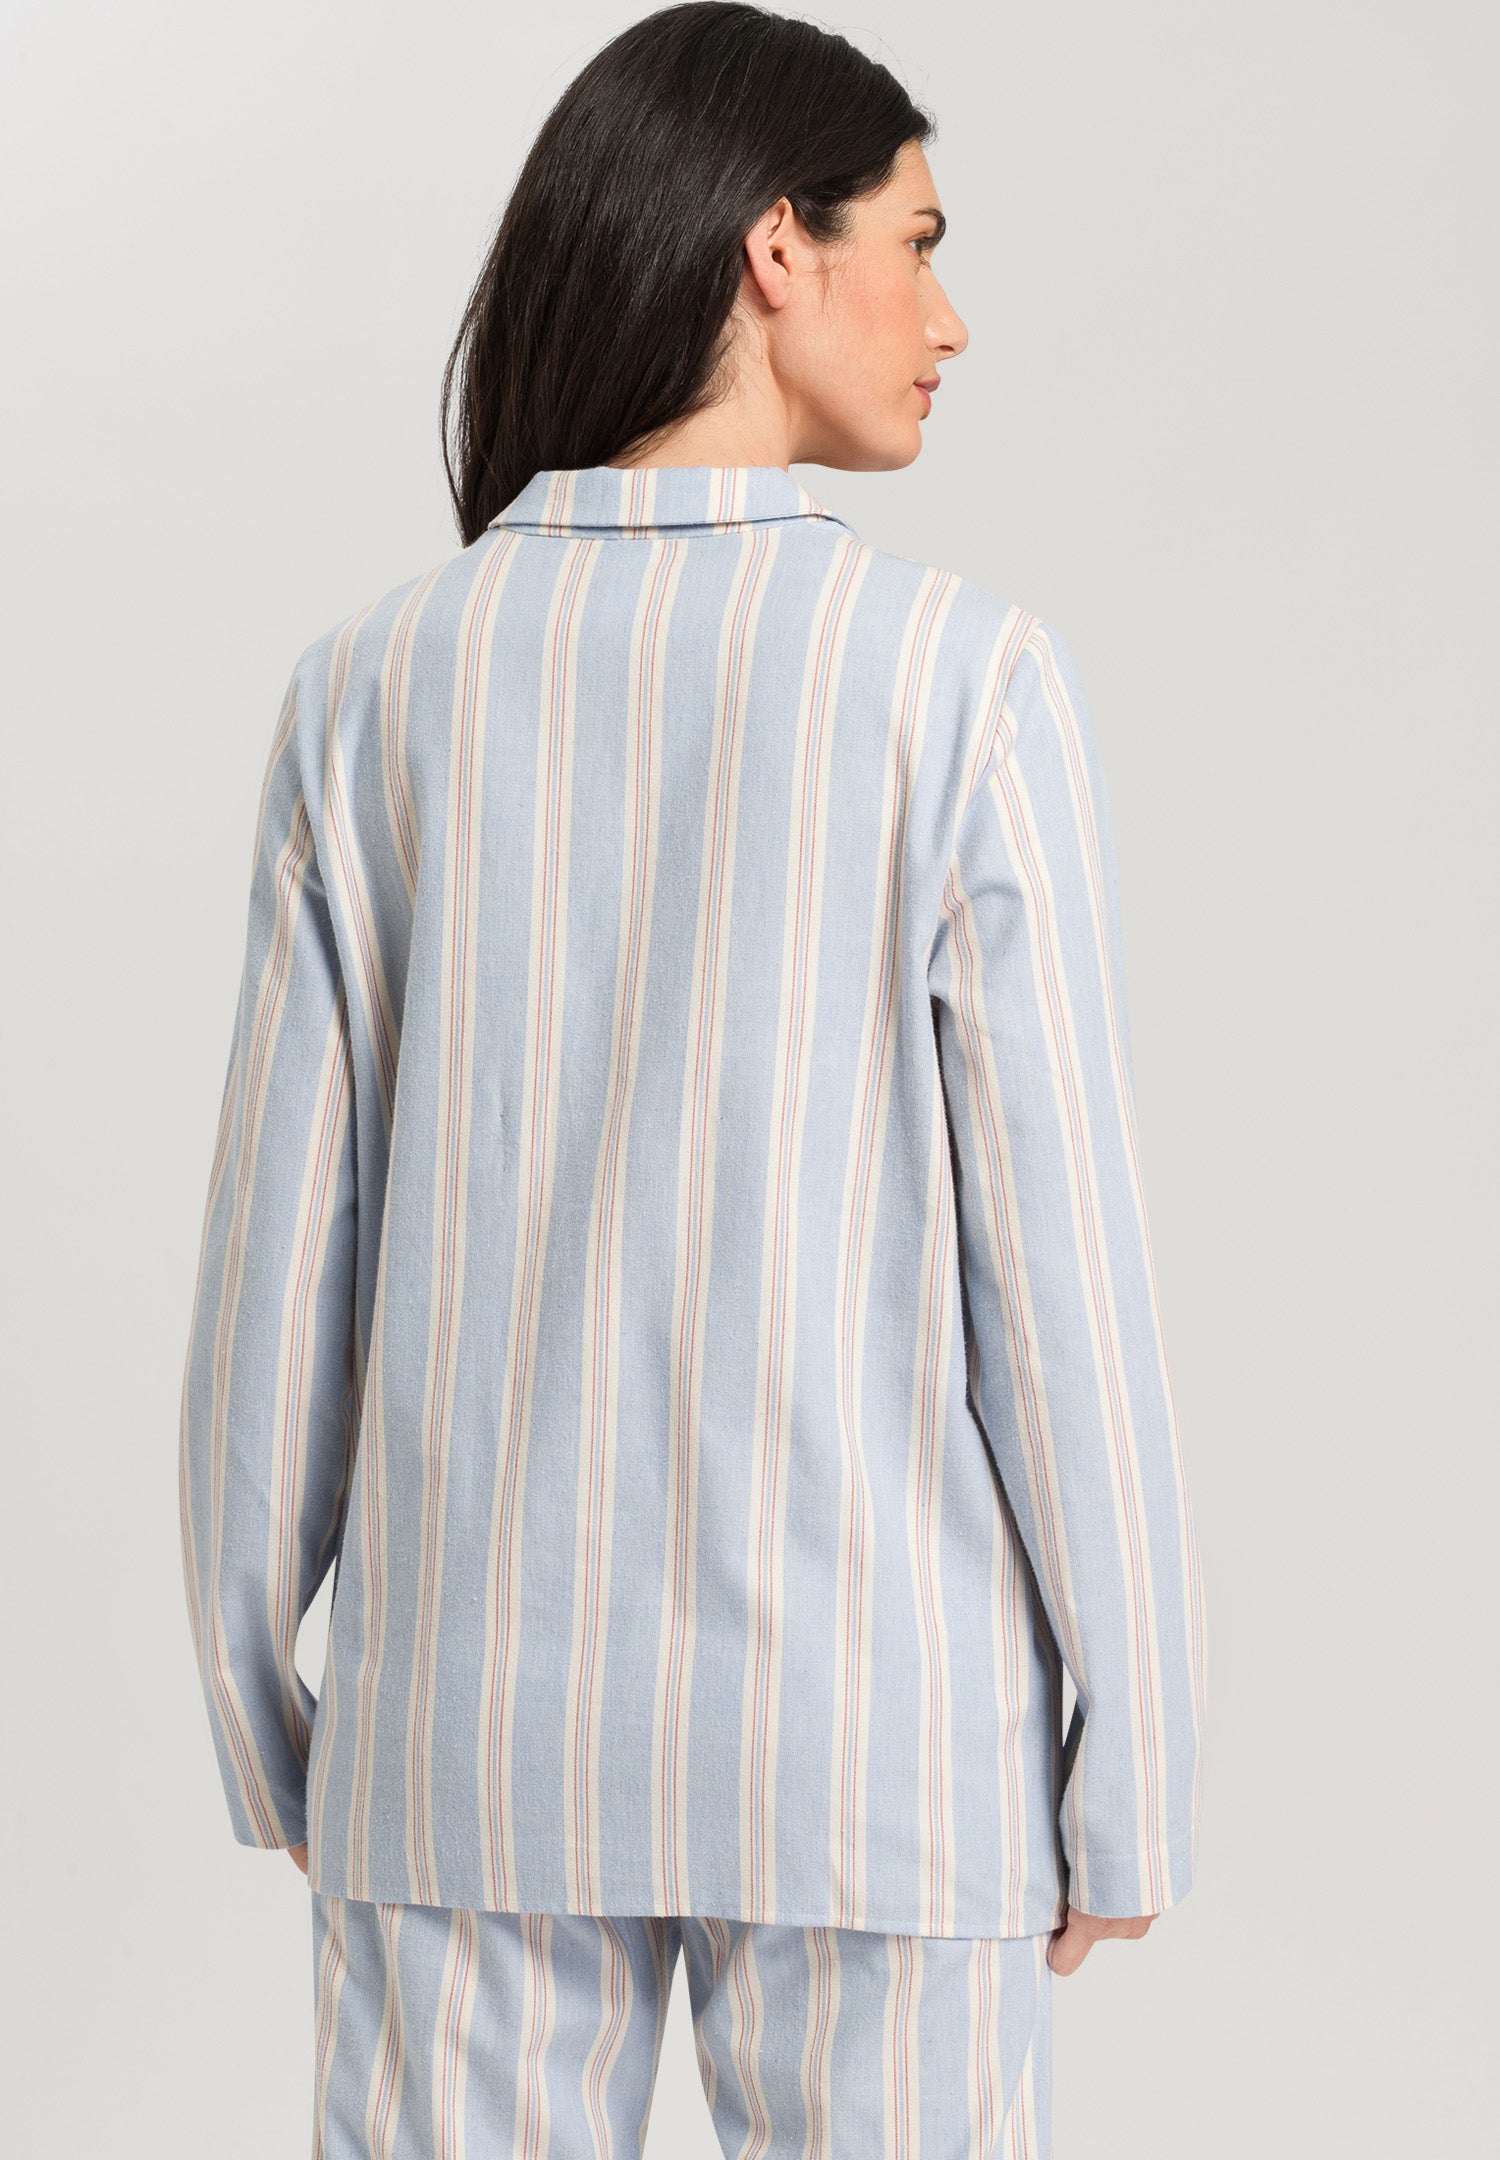 76484 Loungy Nights Flannel Long Sleeve Shirt - 2988 Soft Stripe